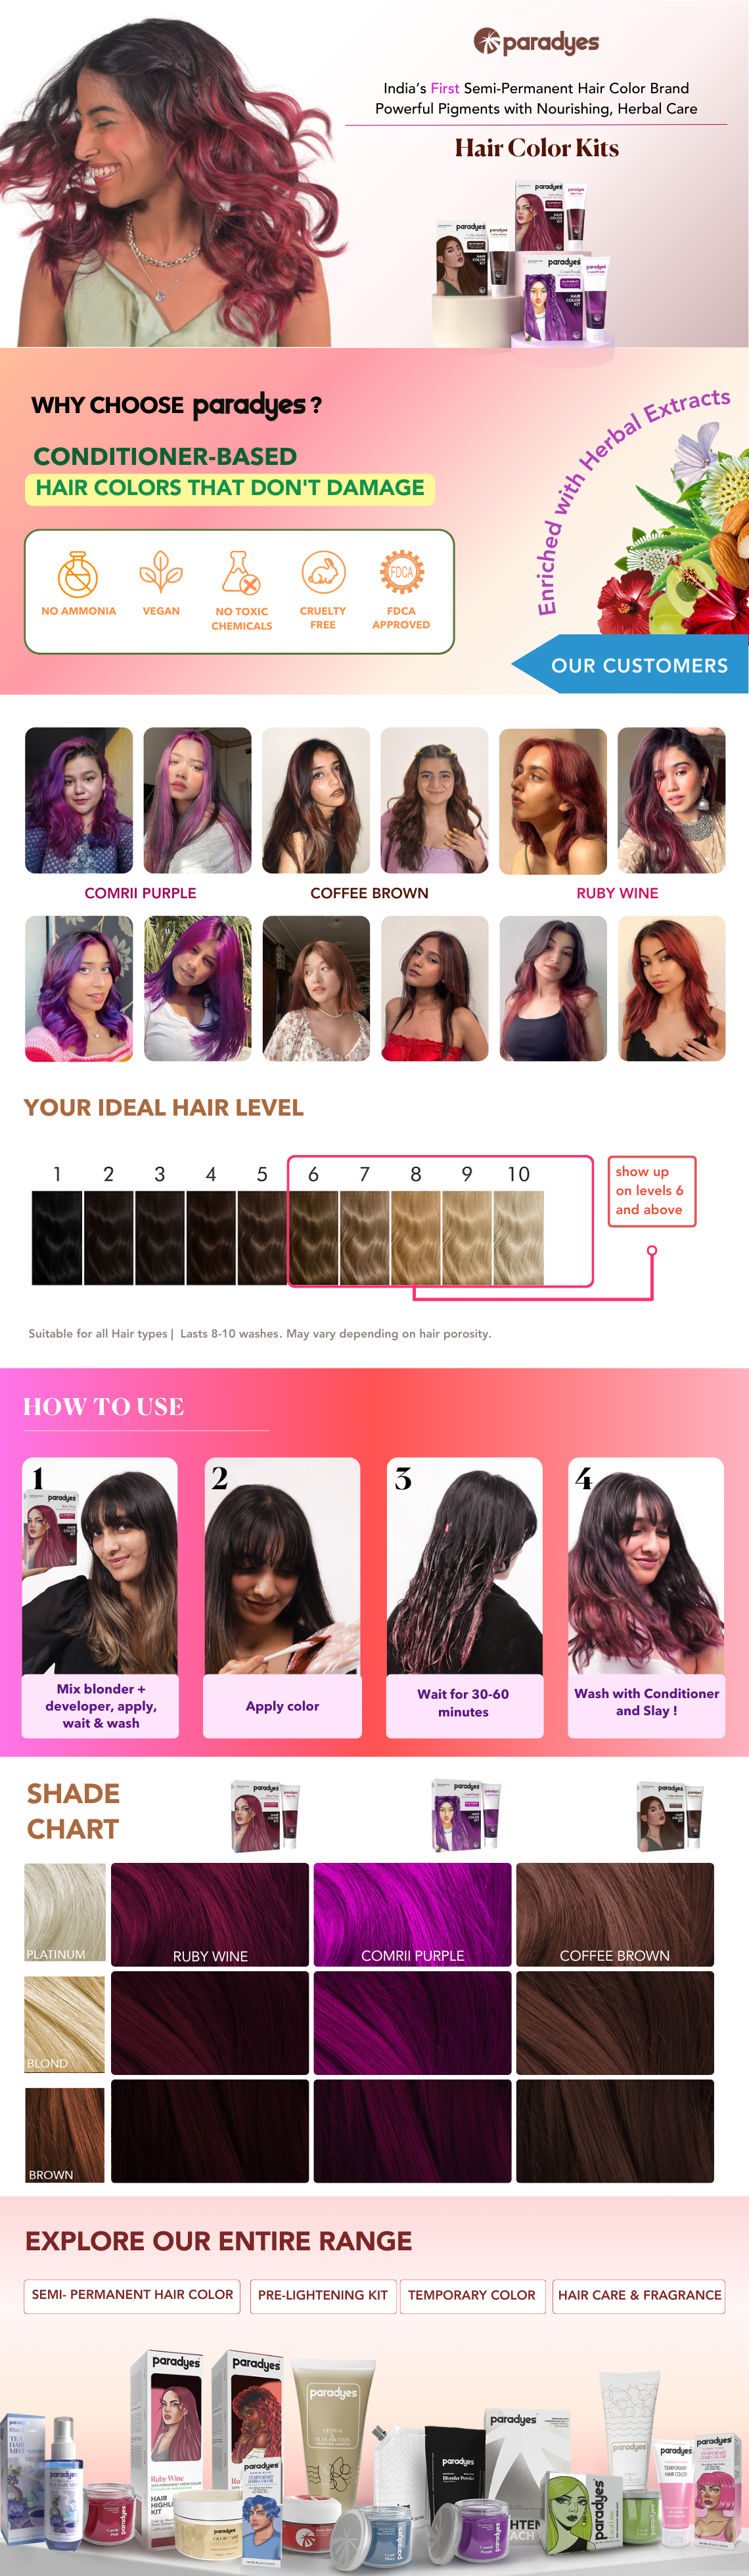 Ruby Wine Hair Color Kit | Lasts 8+ washes